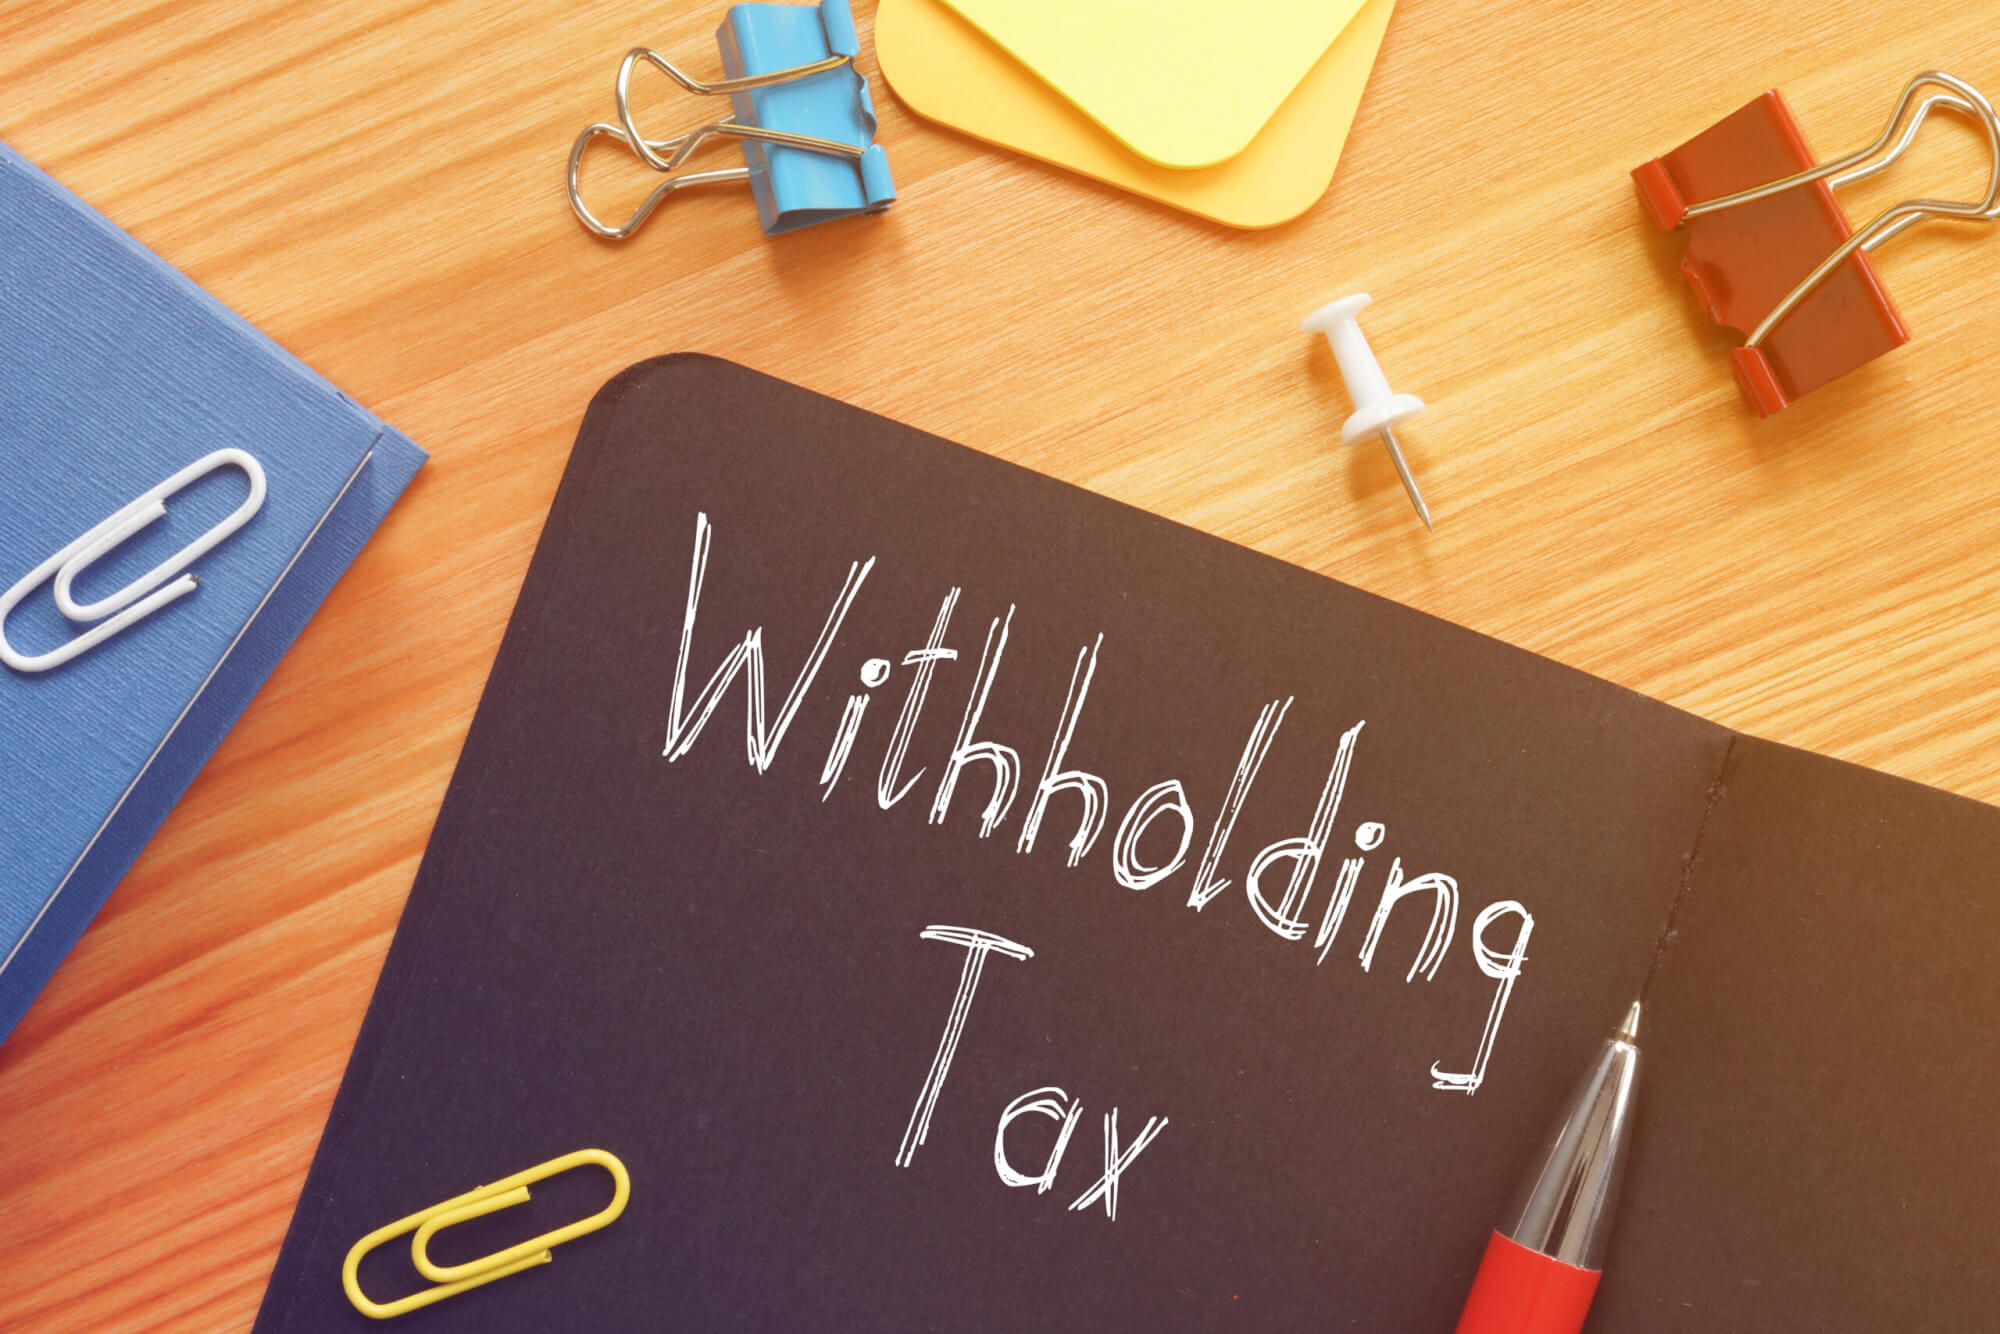 Withholding Tax is shown on the conceptual business photo